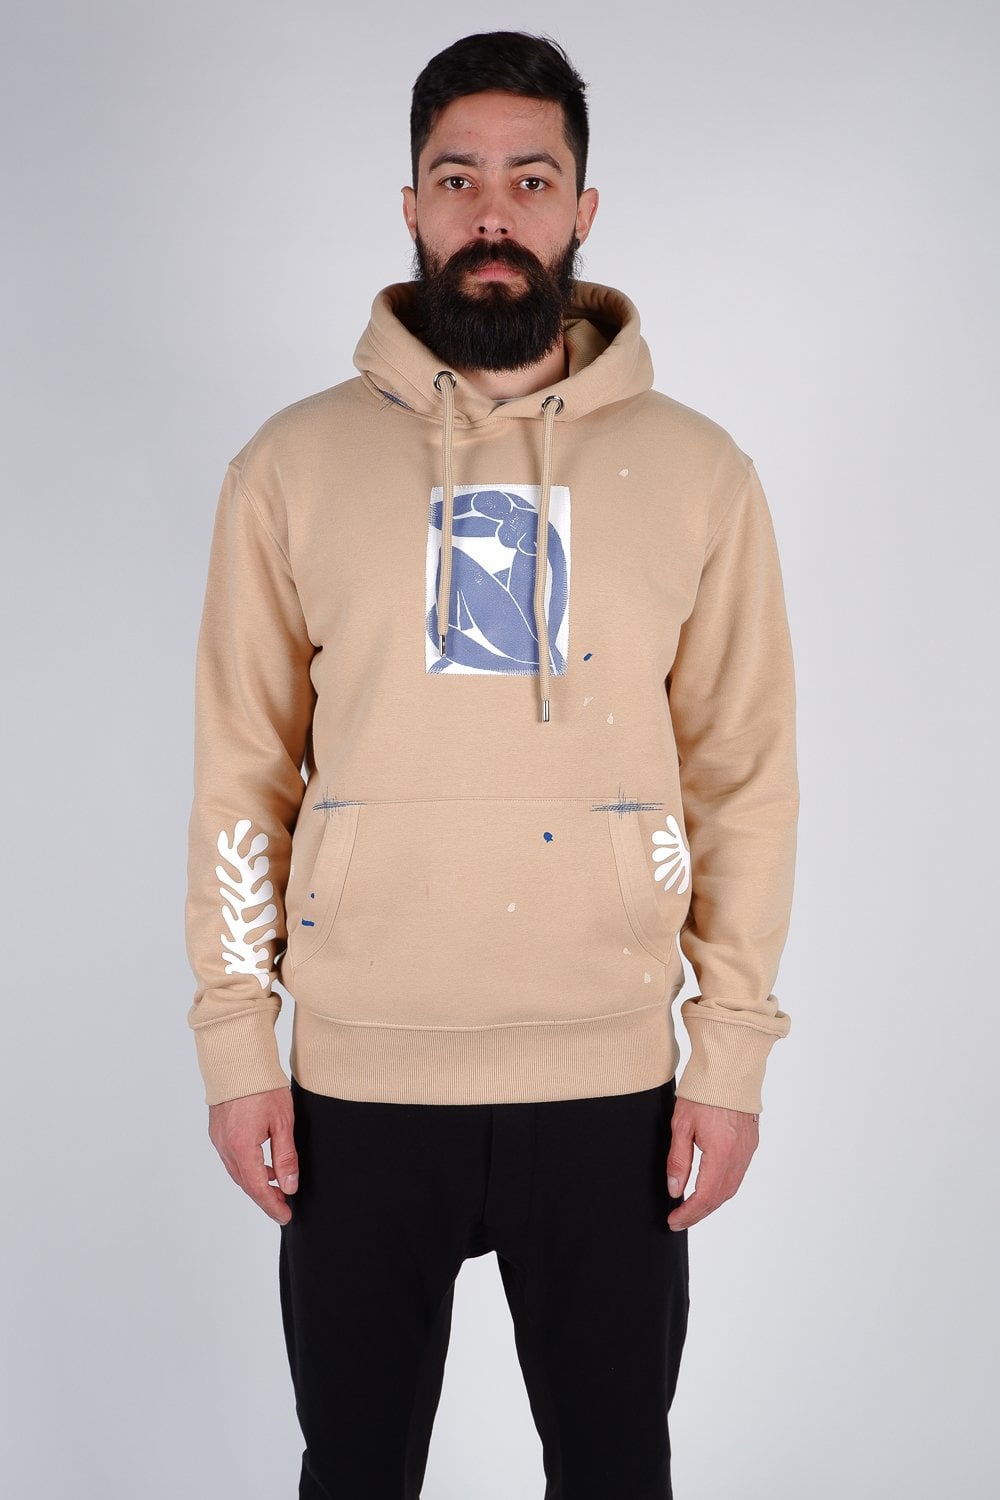 Buy the ABE Matisse Hoodie in Beige at Intro. Spend £50 for free UK delivery. Official stockists. We ship worldwide.